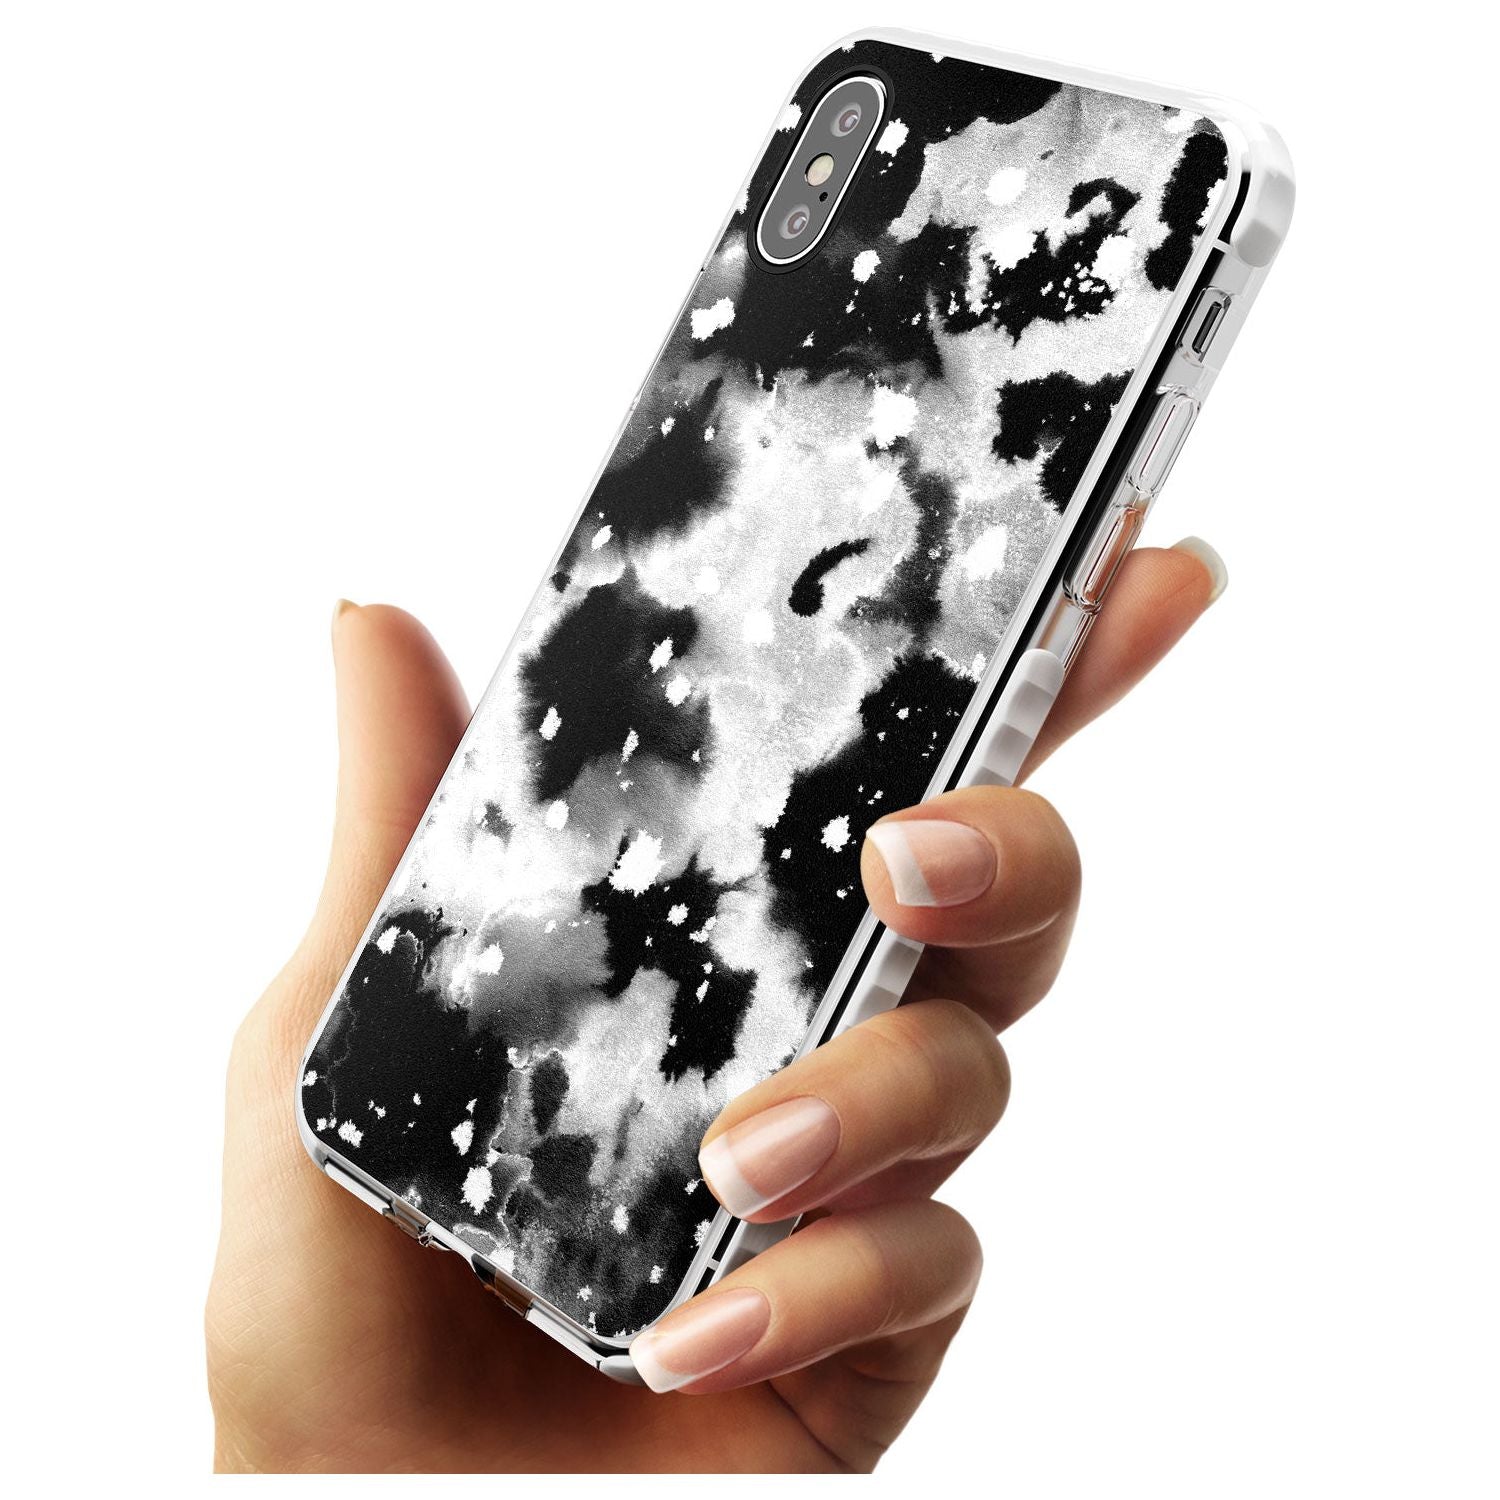 Black & White Acid Wash Tie-Dye Pattern Impact Phone Case for iPhone X XS Max XR